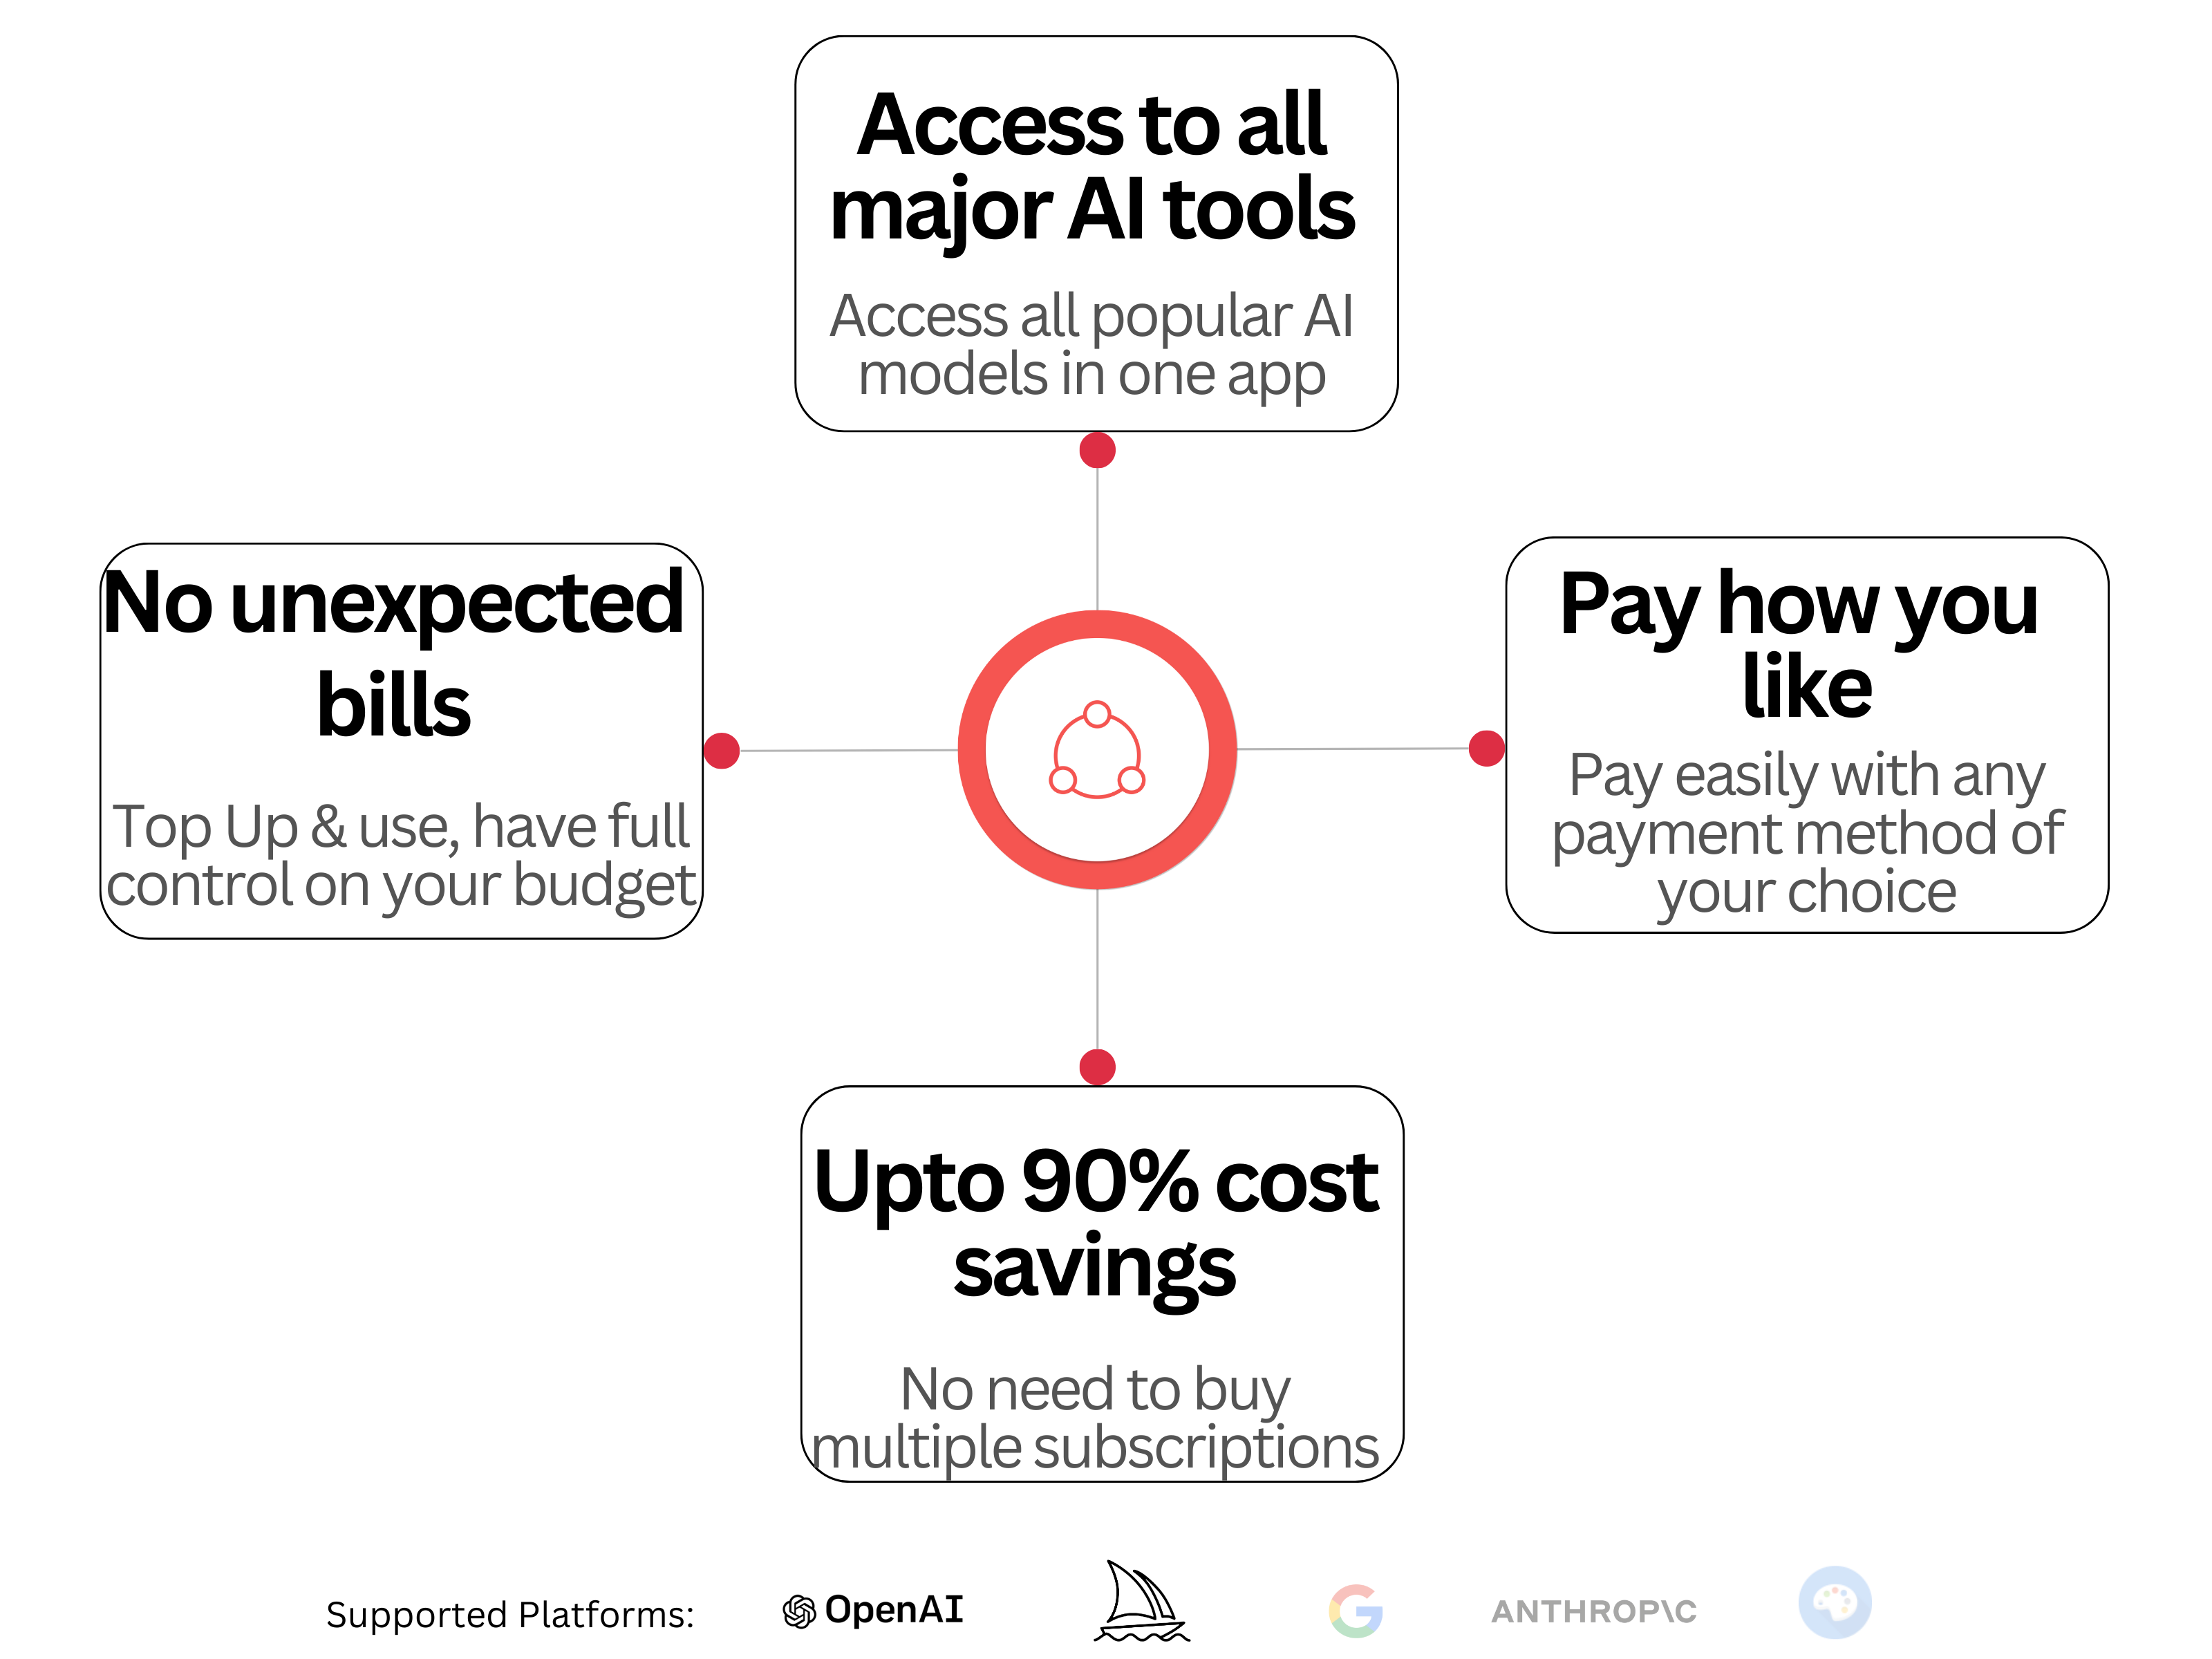 how accessify is a one stop shop to get access to all AI tooling